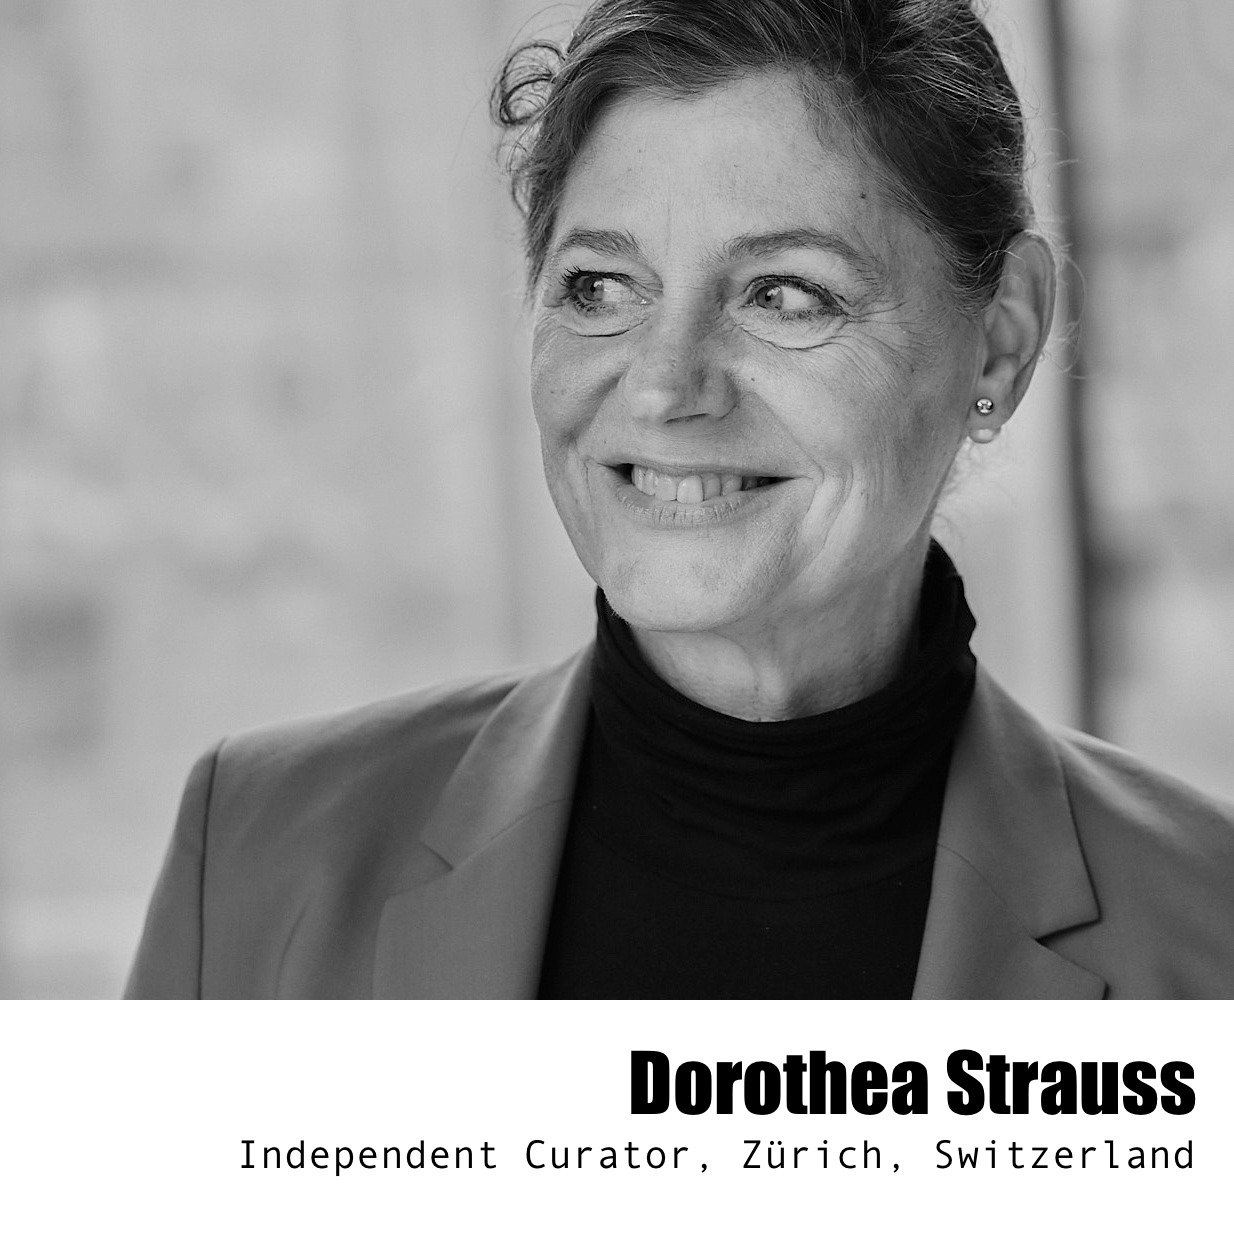 Meet new IKT Member: Dorothea Strauss @dorotheastrauss

As a curator and transformation expert, Dorothea Strauss wants to bring art and society into dialogue and create new opportunities for individual and collective learning. Engaging with art and c